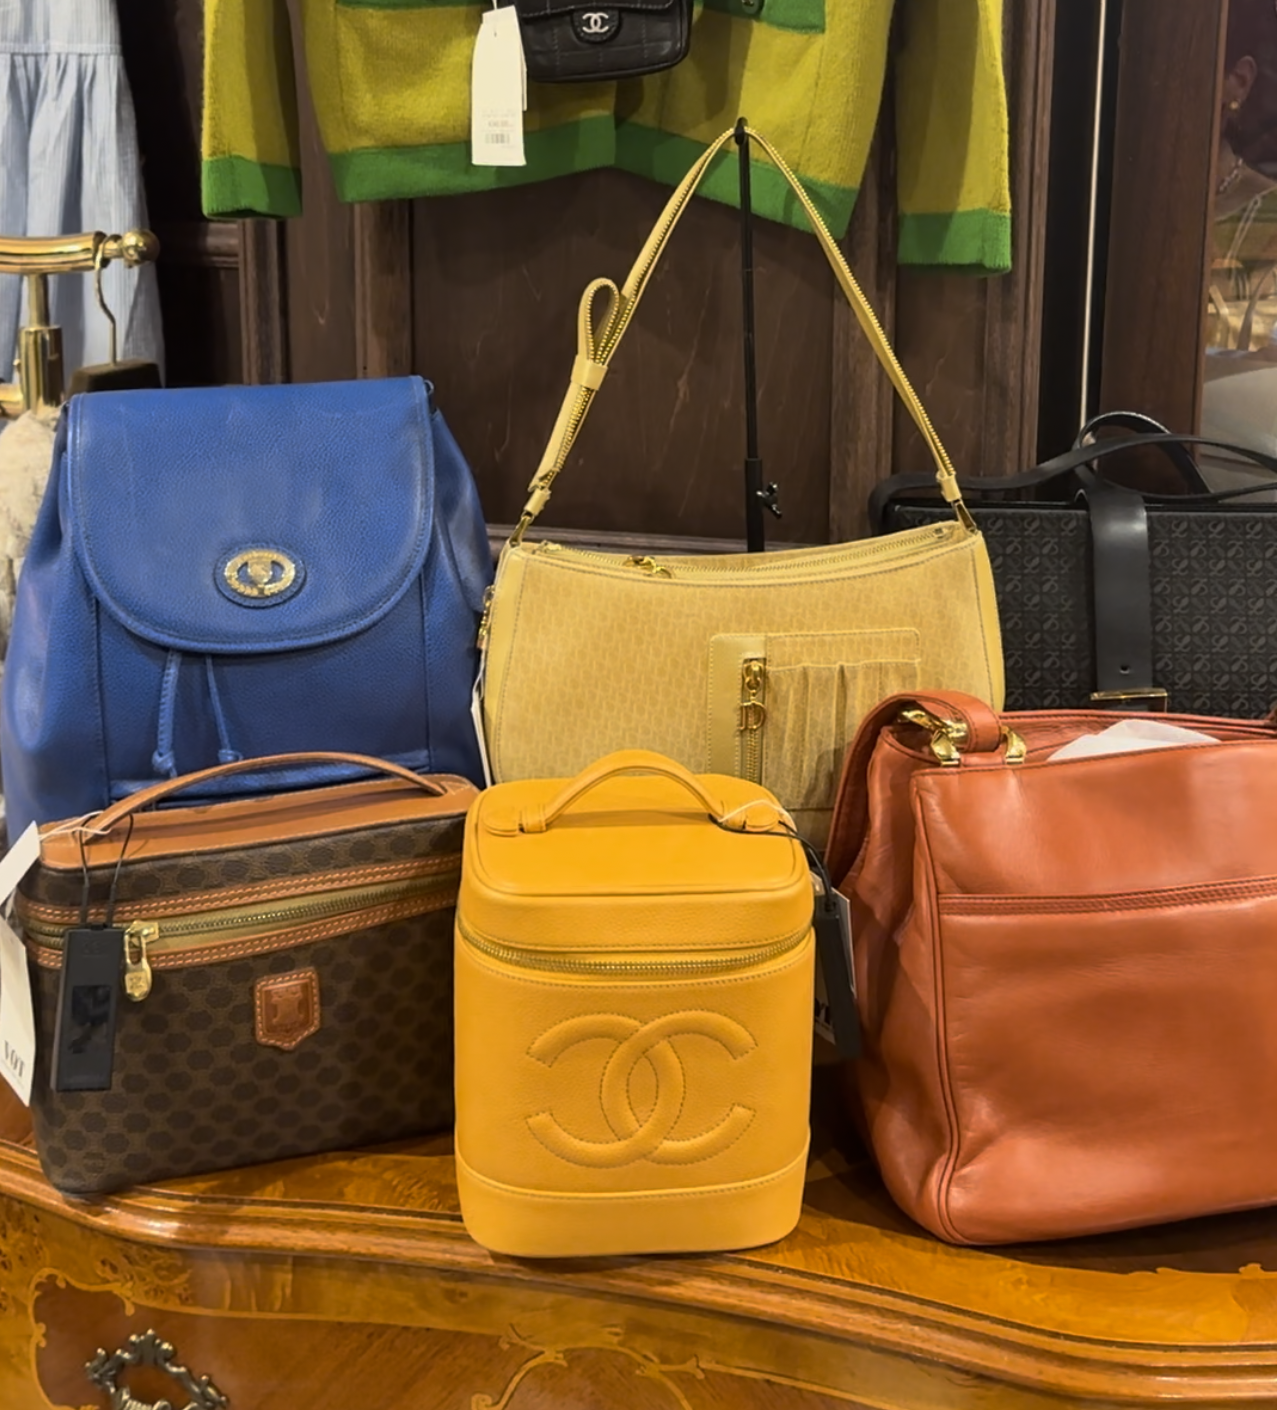 Vintage Designer Handbags Available at the Following Locations